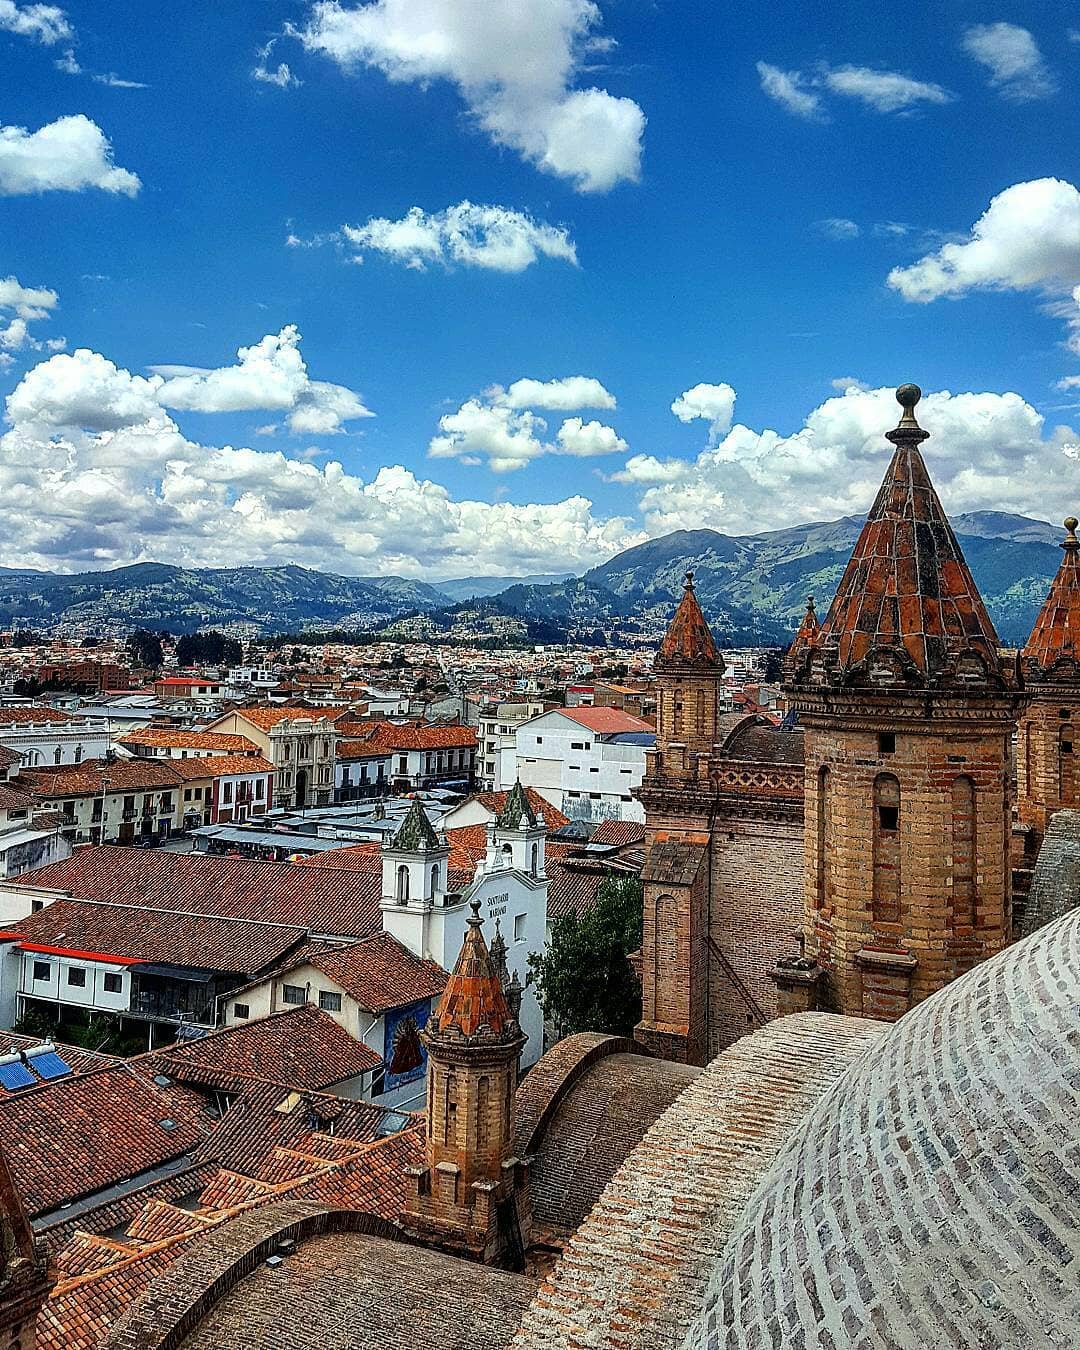 Skyline of churches and homes in Cuenca, Ecuador. Photo by Instagram user @pedroflores2286